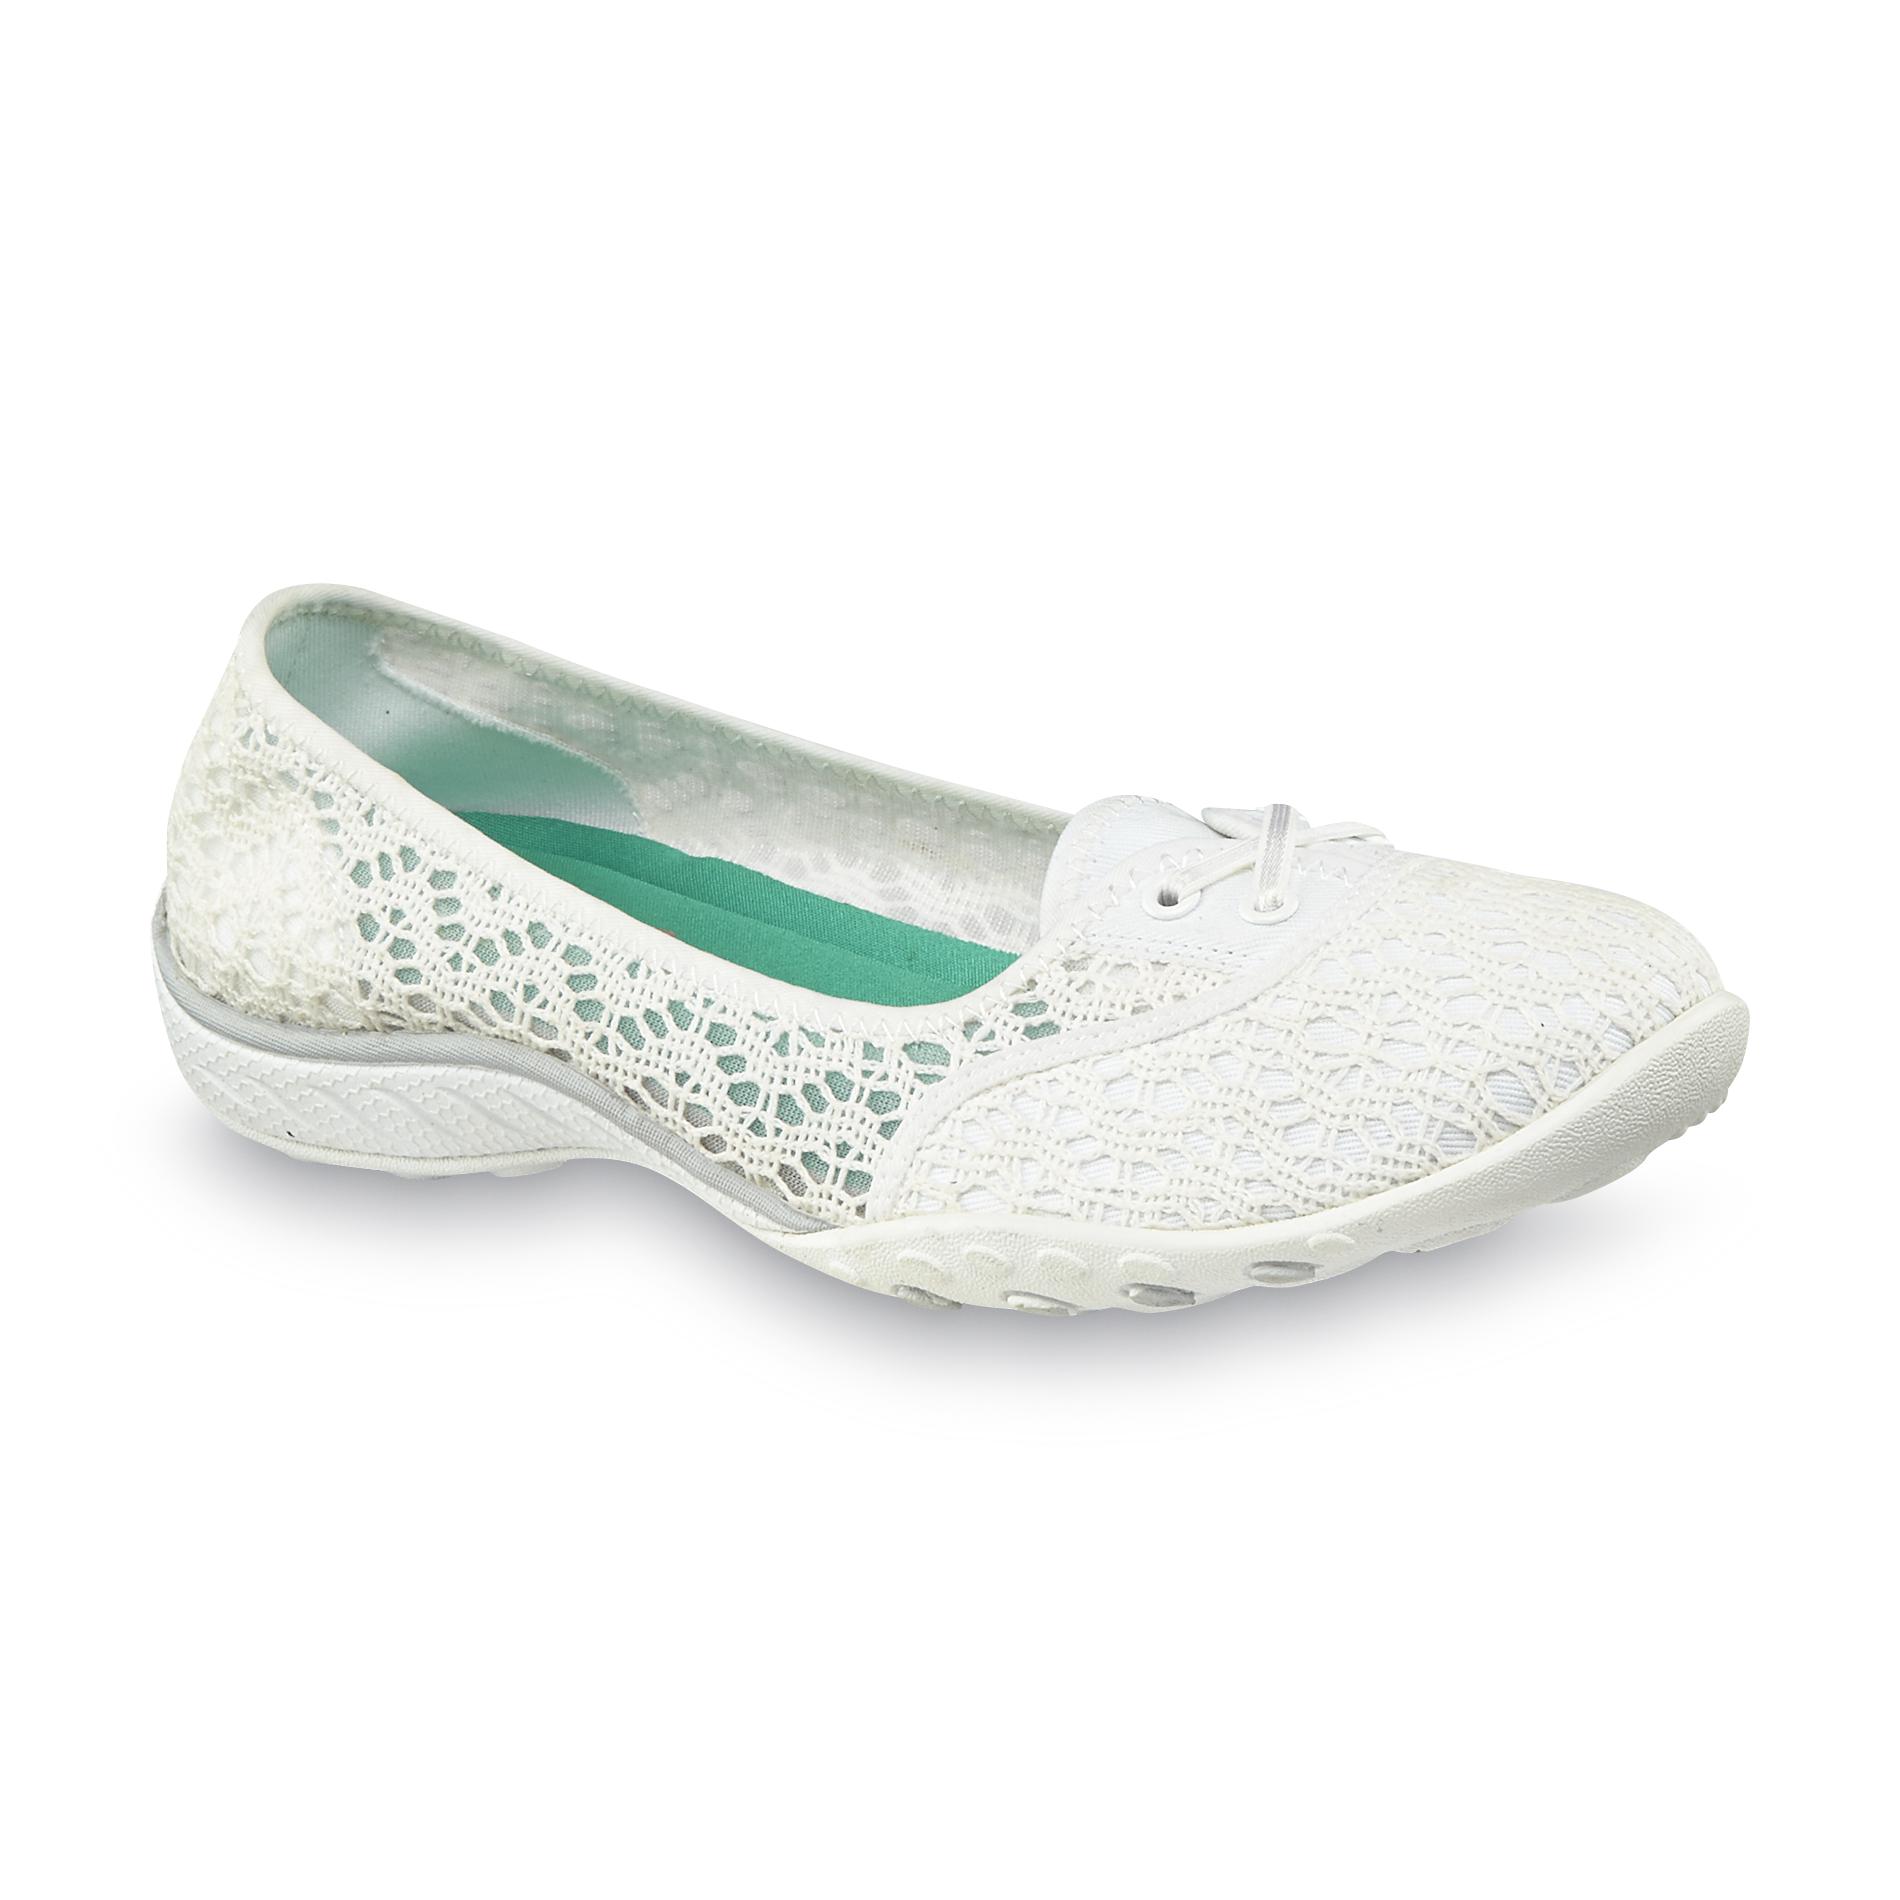 UPC 888222945930 - Skechers Women's Relaxed Fit Cutie Pie White/Lace ...